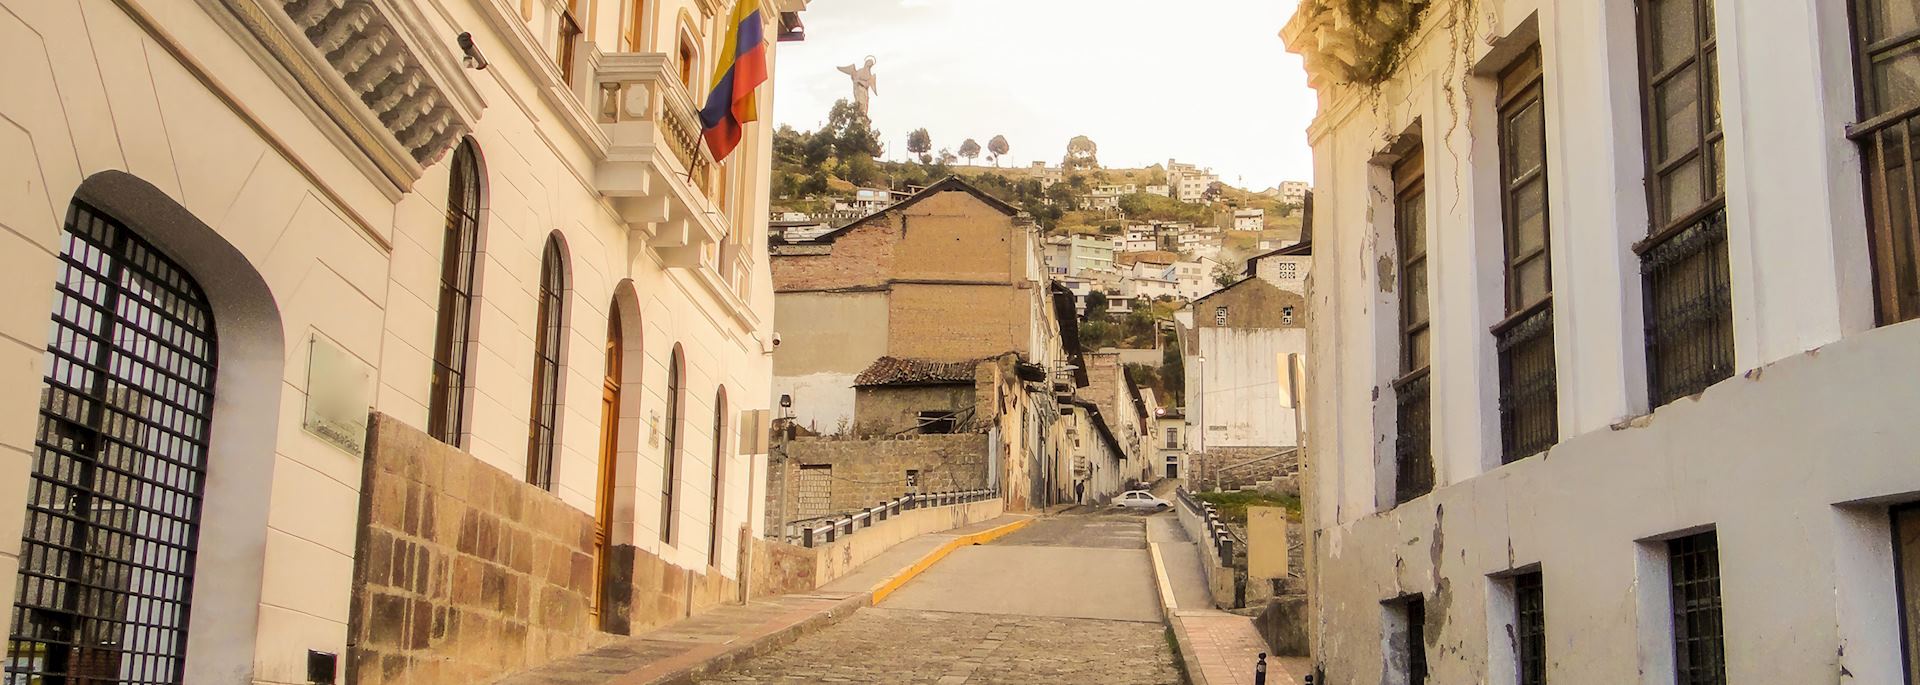 Cobbled street in Quito